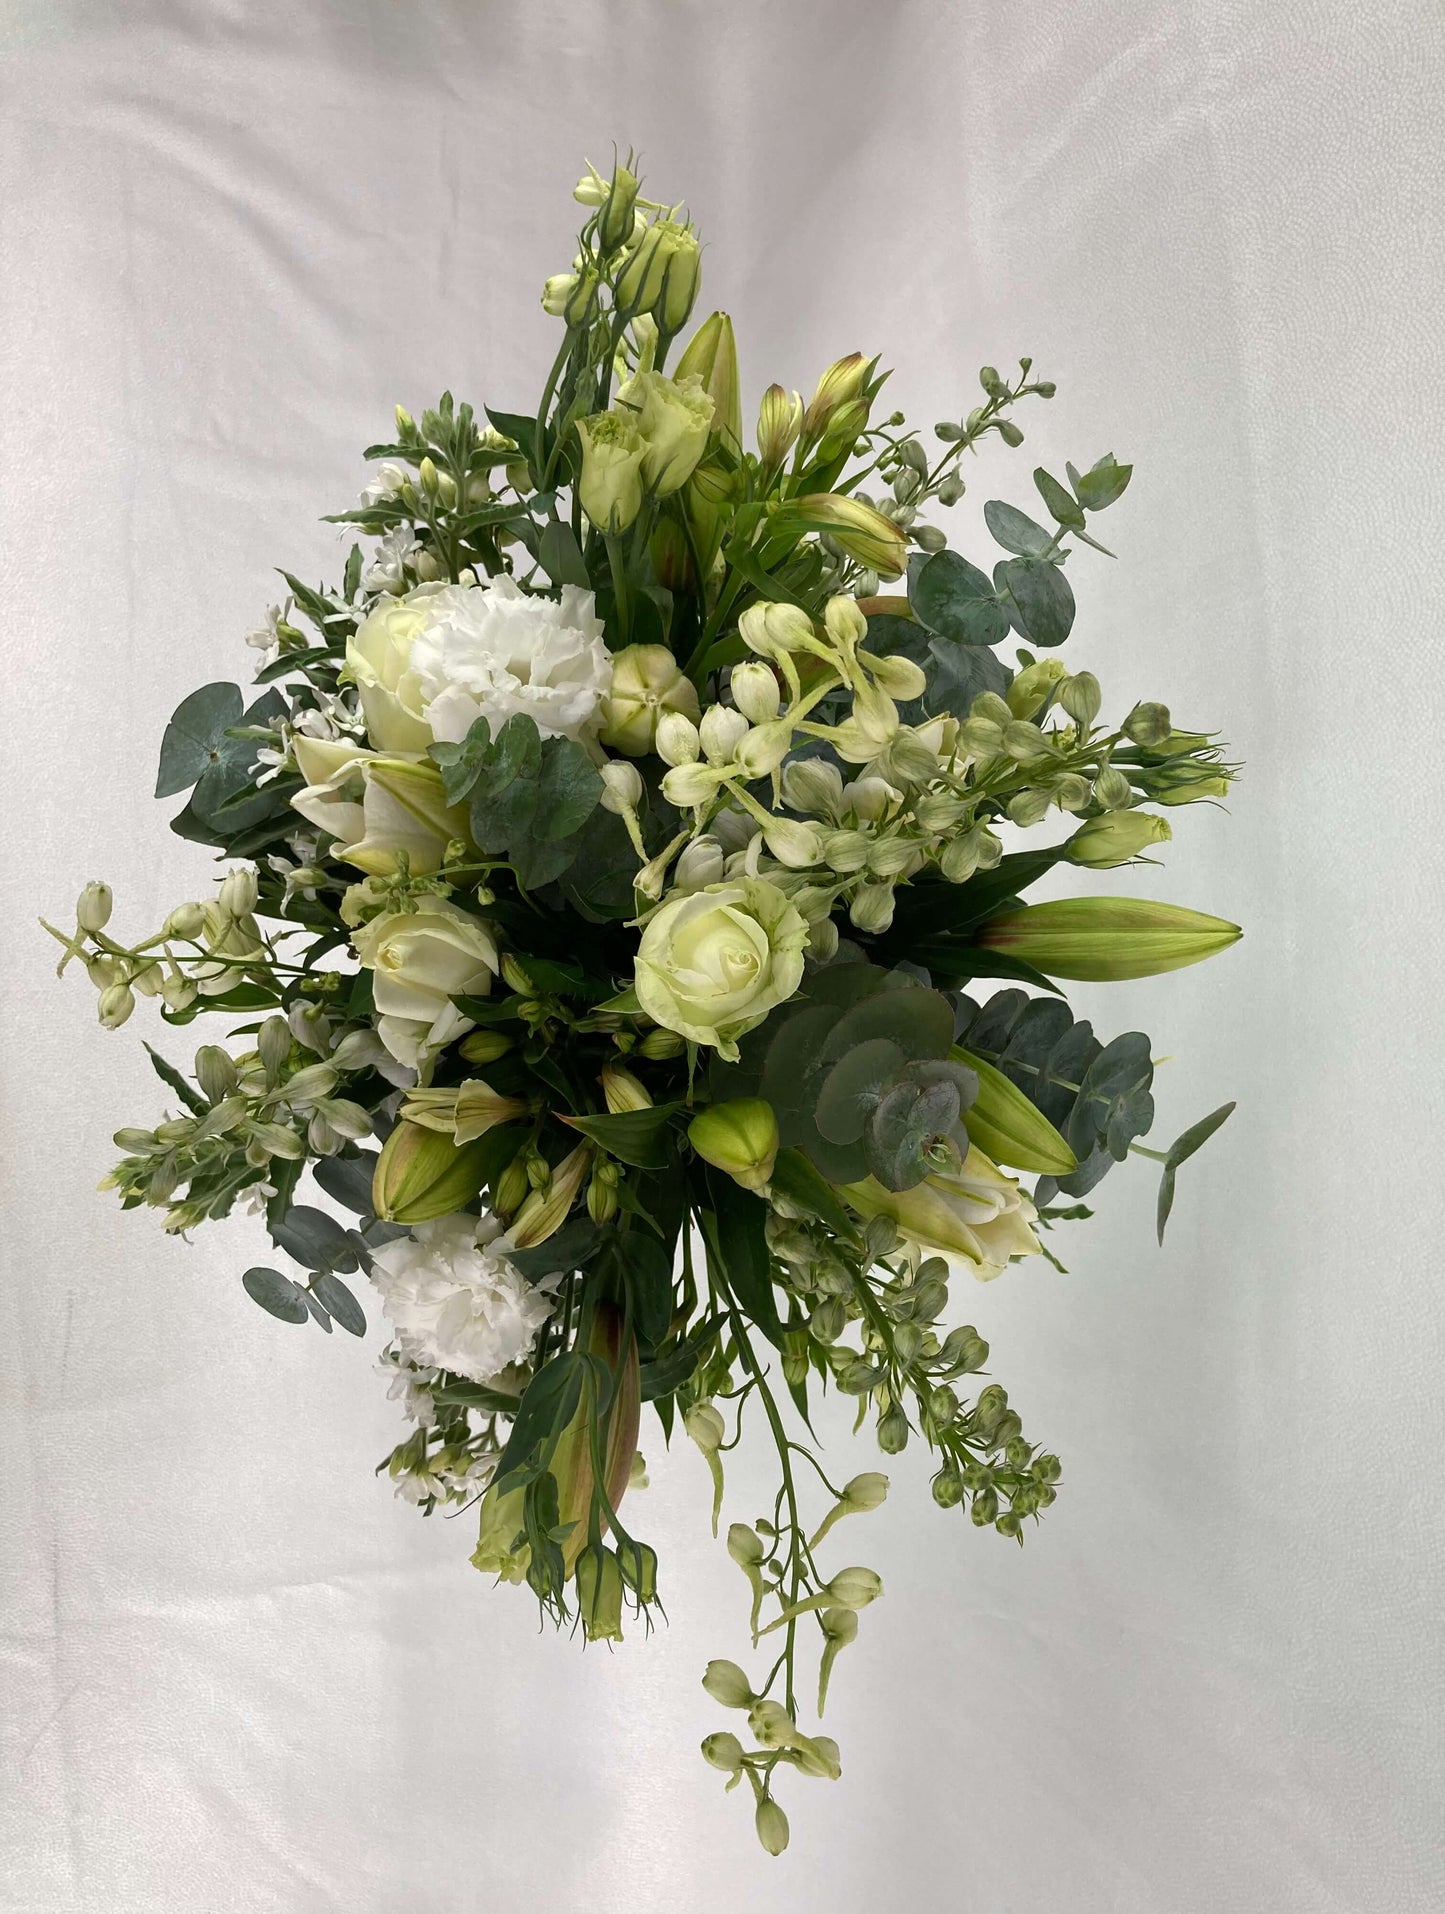 A white and green bouquet from above.